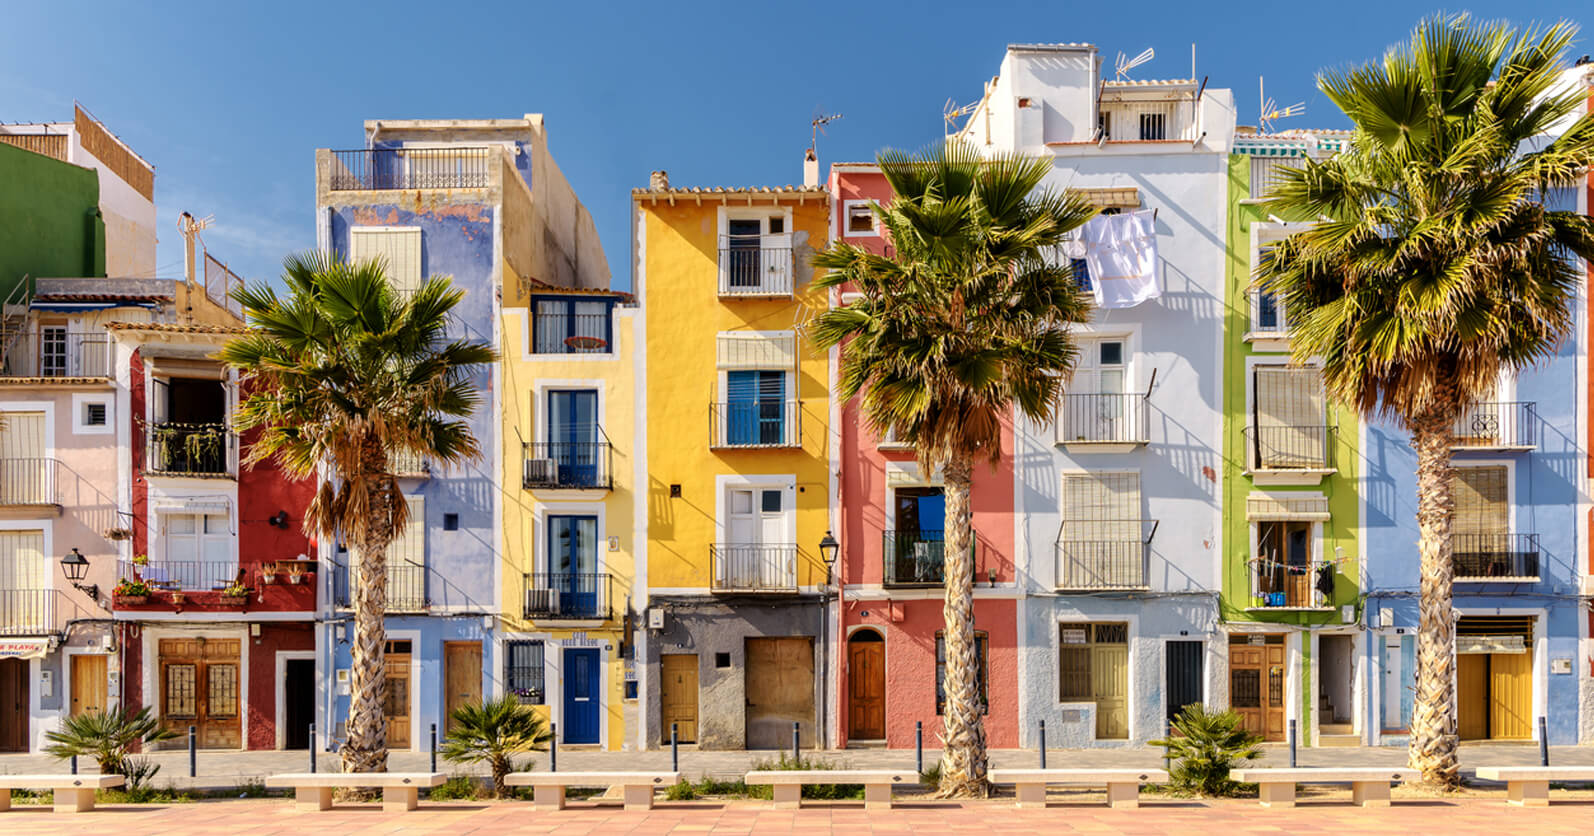 Finding accommodation in Spain